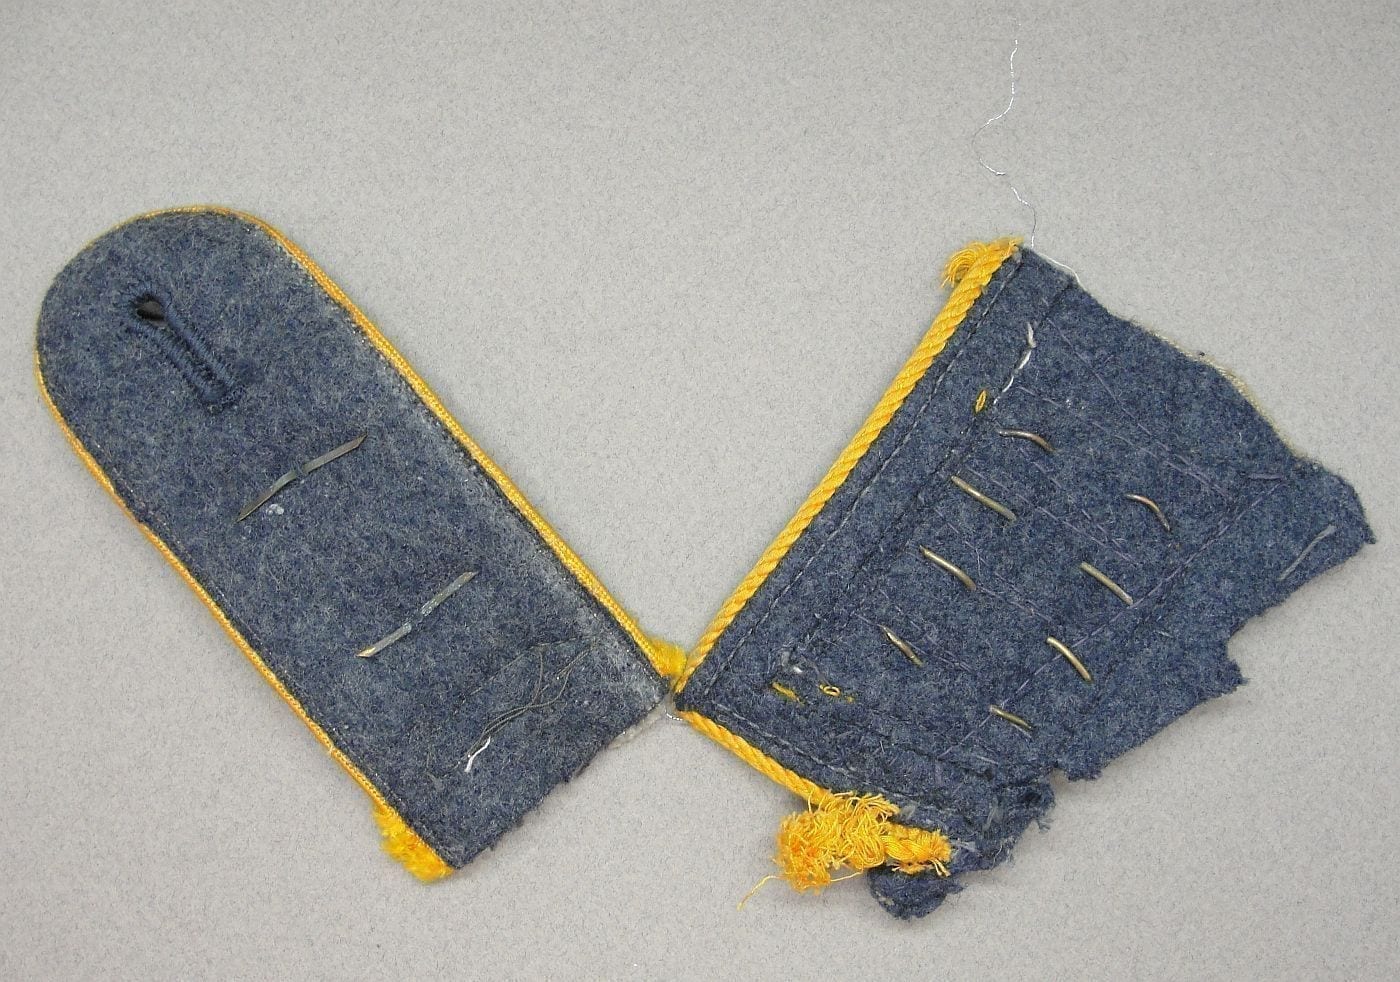 Luftwaffe Collar Tab and Shoulder Board from Same Tunic